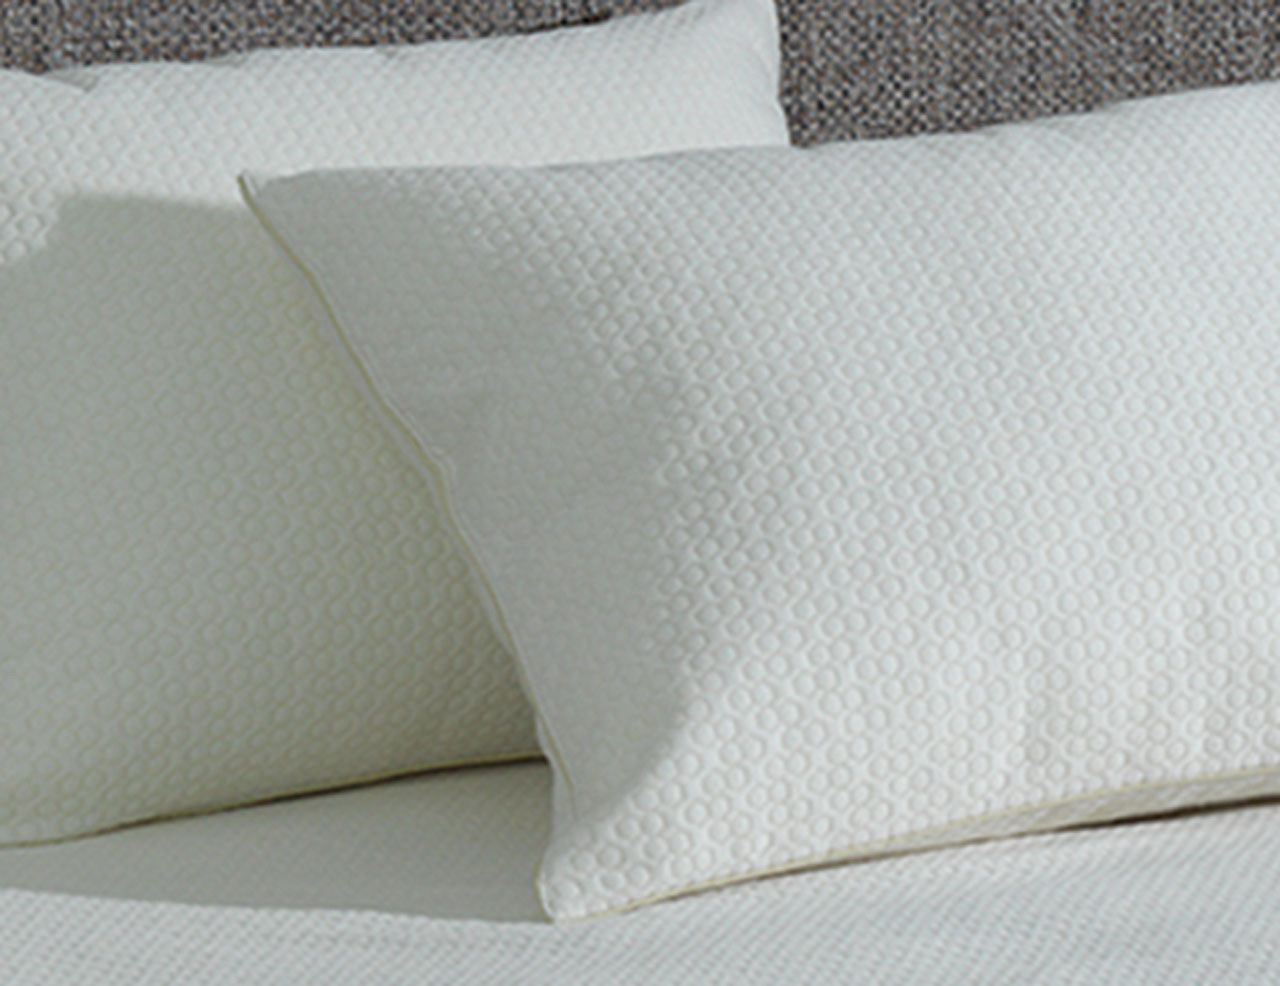 What type of fill do AllerEase Professional Pillows Platinum Style have?